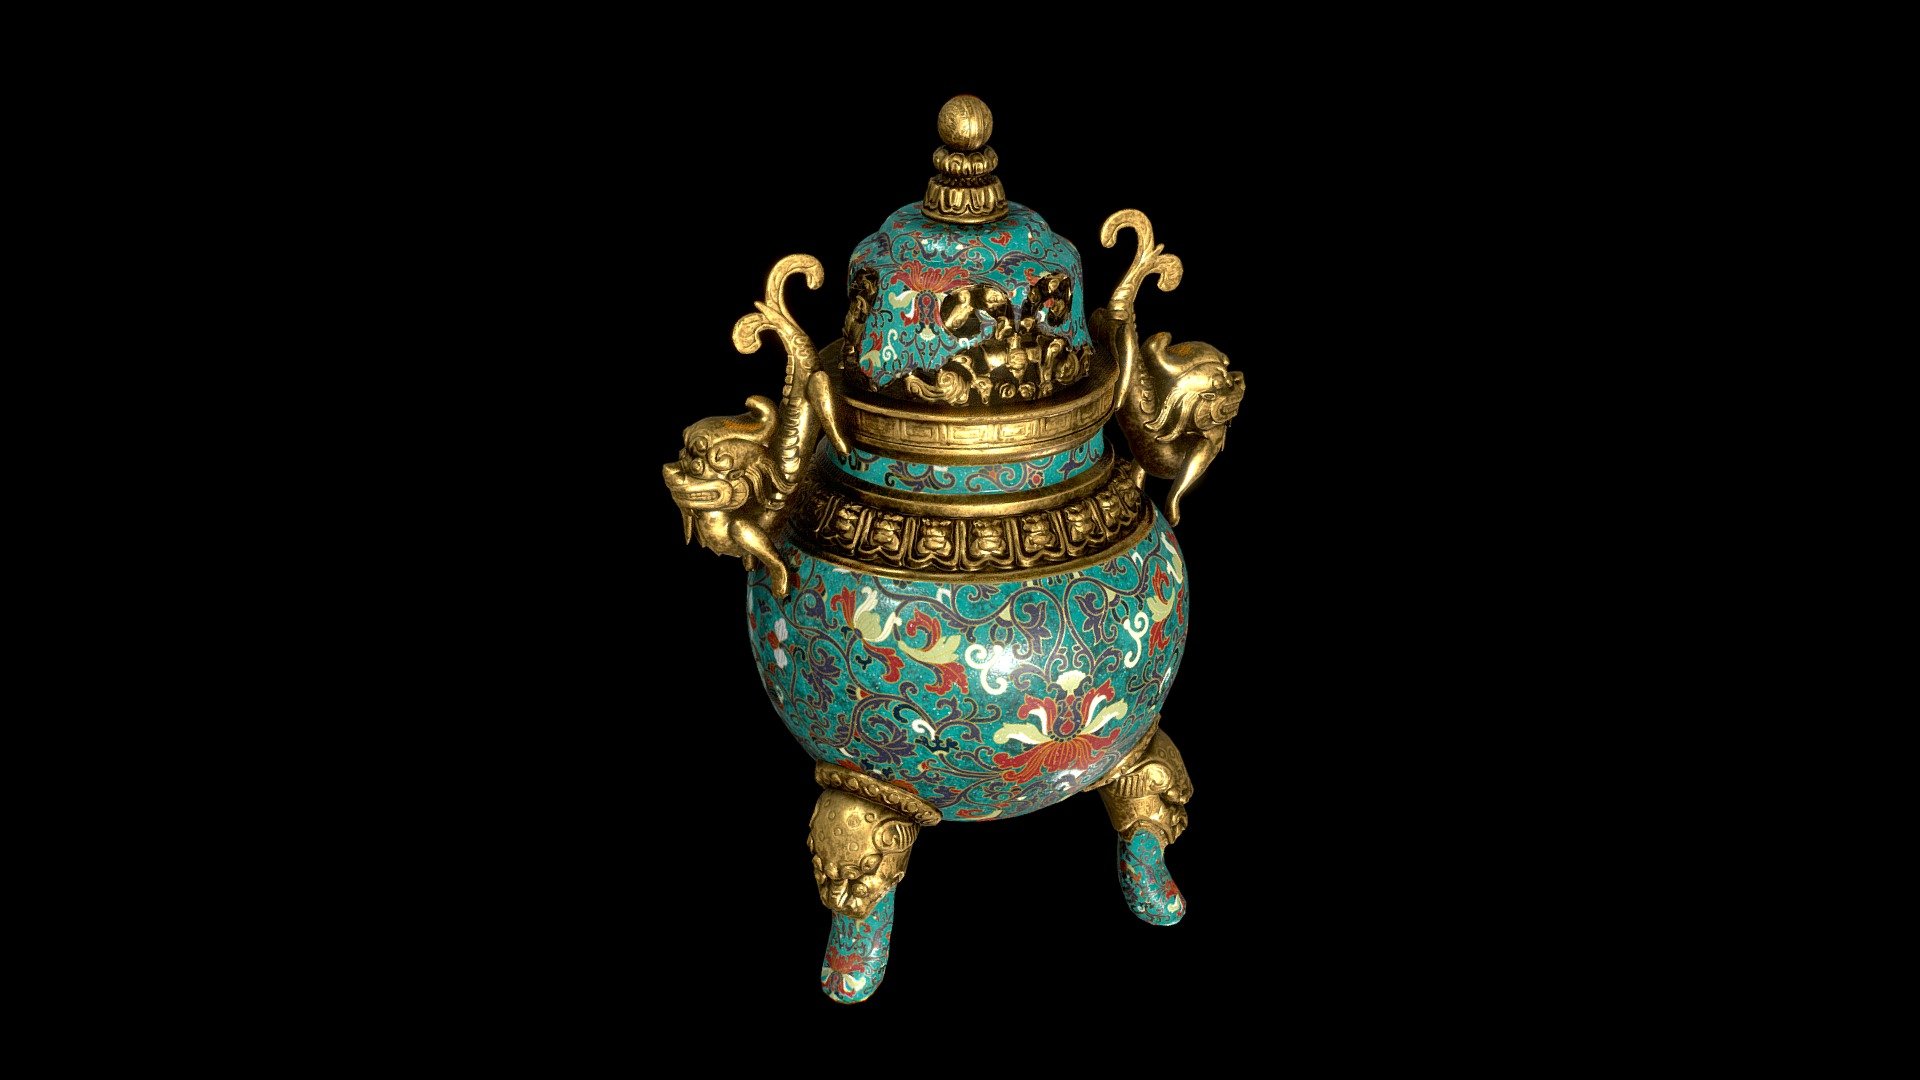 Free download：www.freepoly.org - A Cloisonne Enamel Tripod Censer-Freepoly.org - Download Free 3D model by Freepoly.org (@blackrray) 3d model